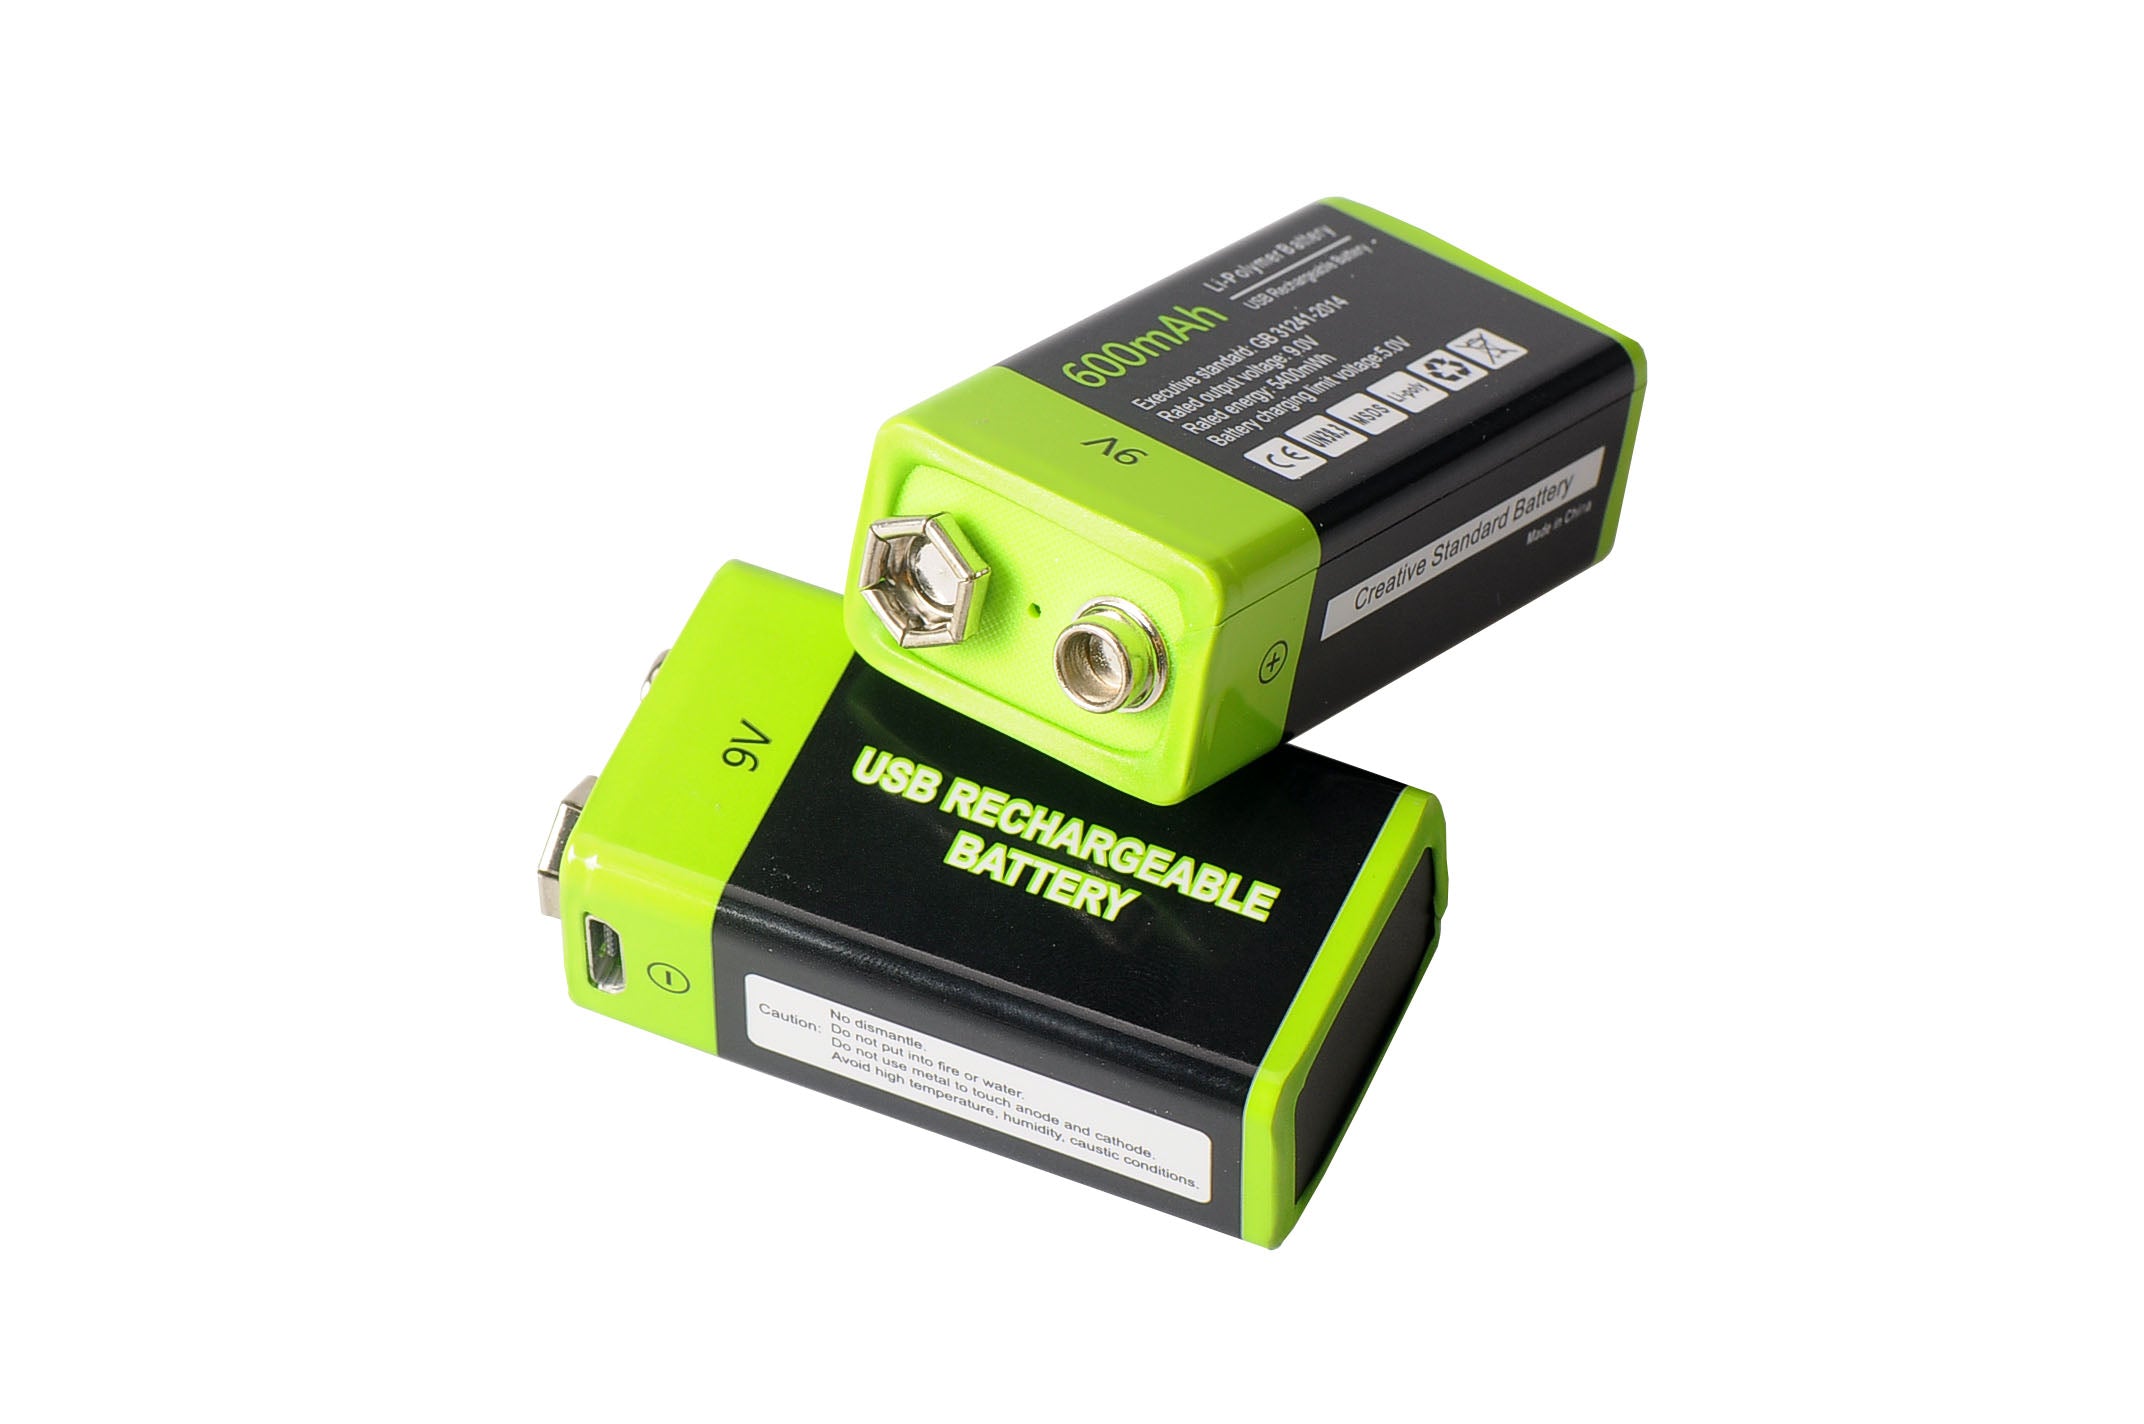 Batterie rechargeable USB 9V 5400mWh